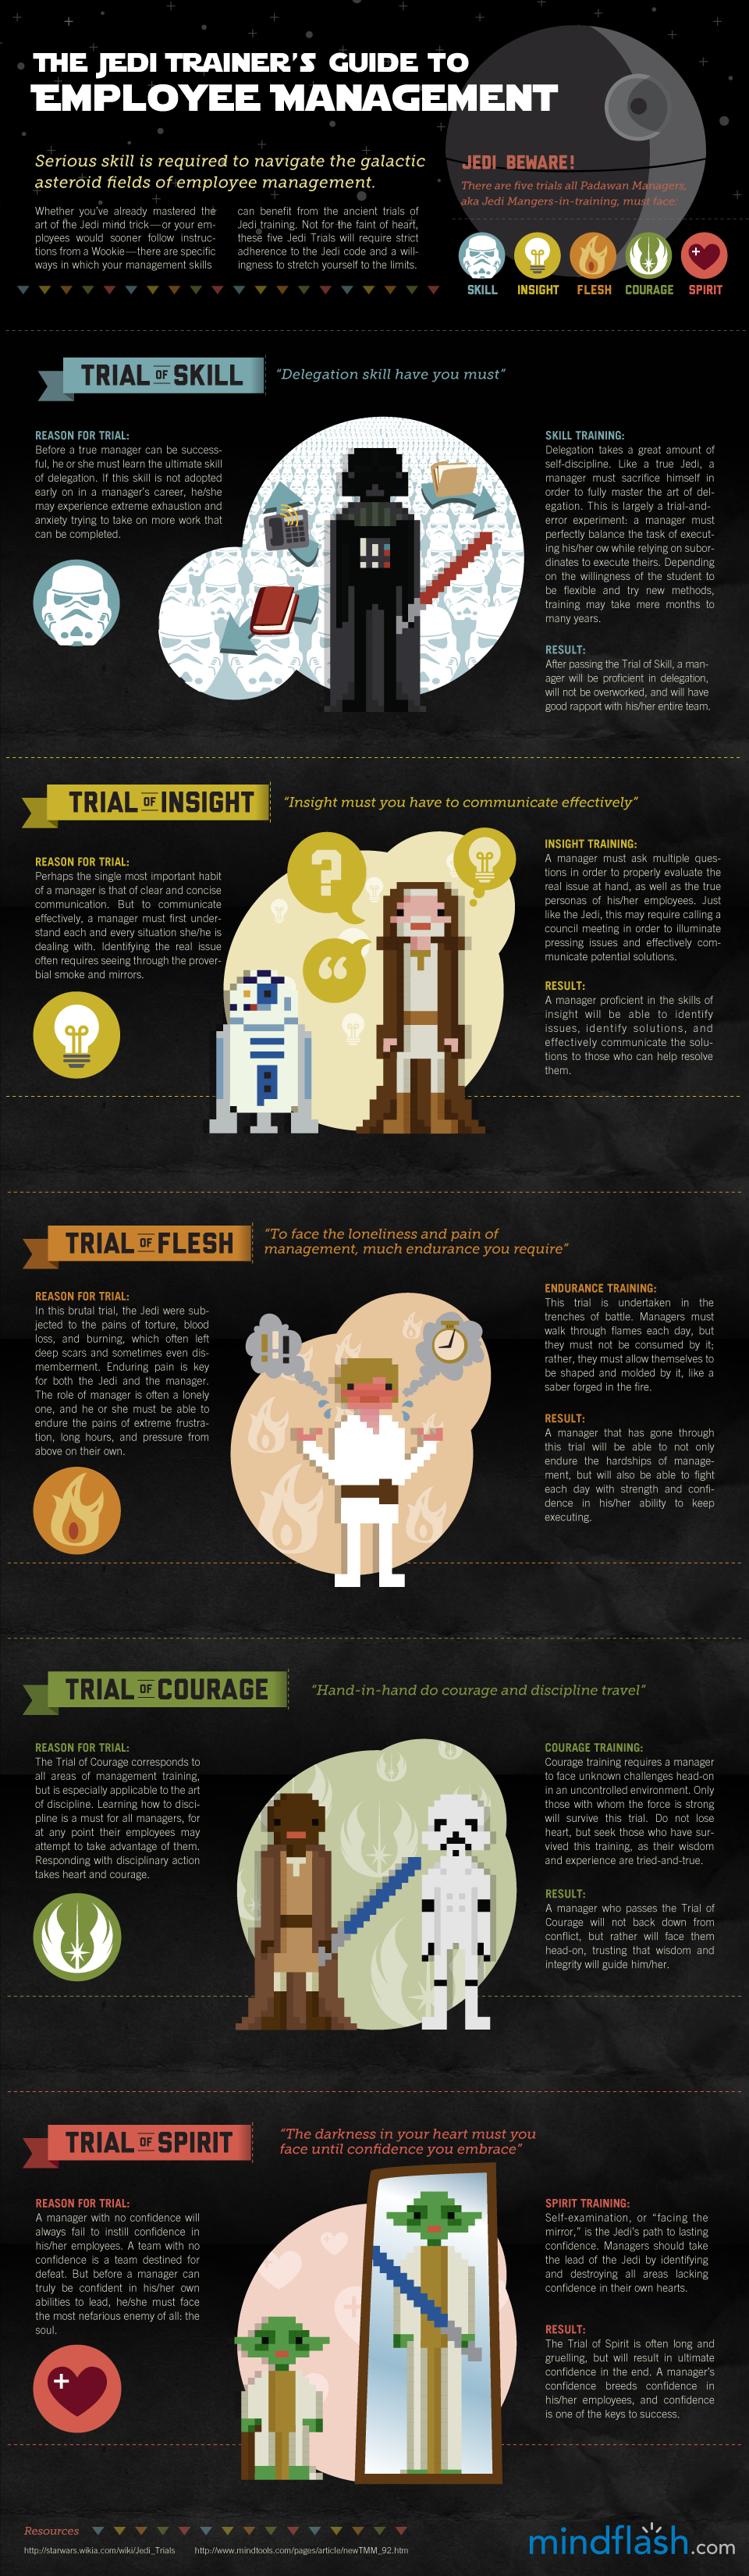 The Jedi Trainer’s Guide To Employee Management [Infographic]